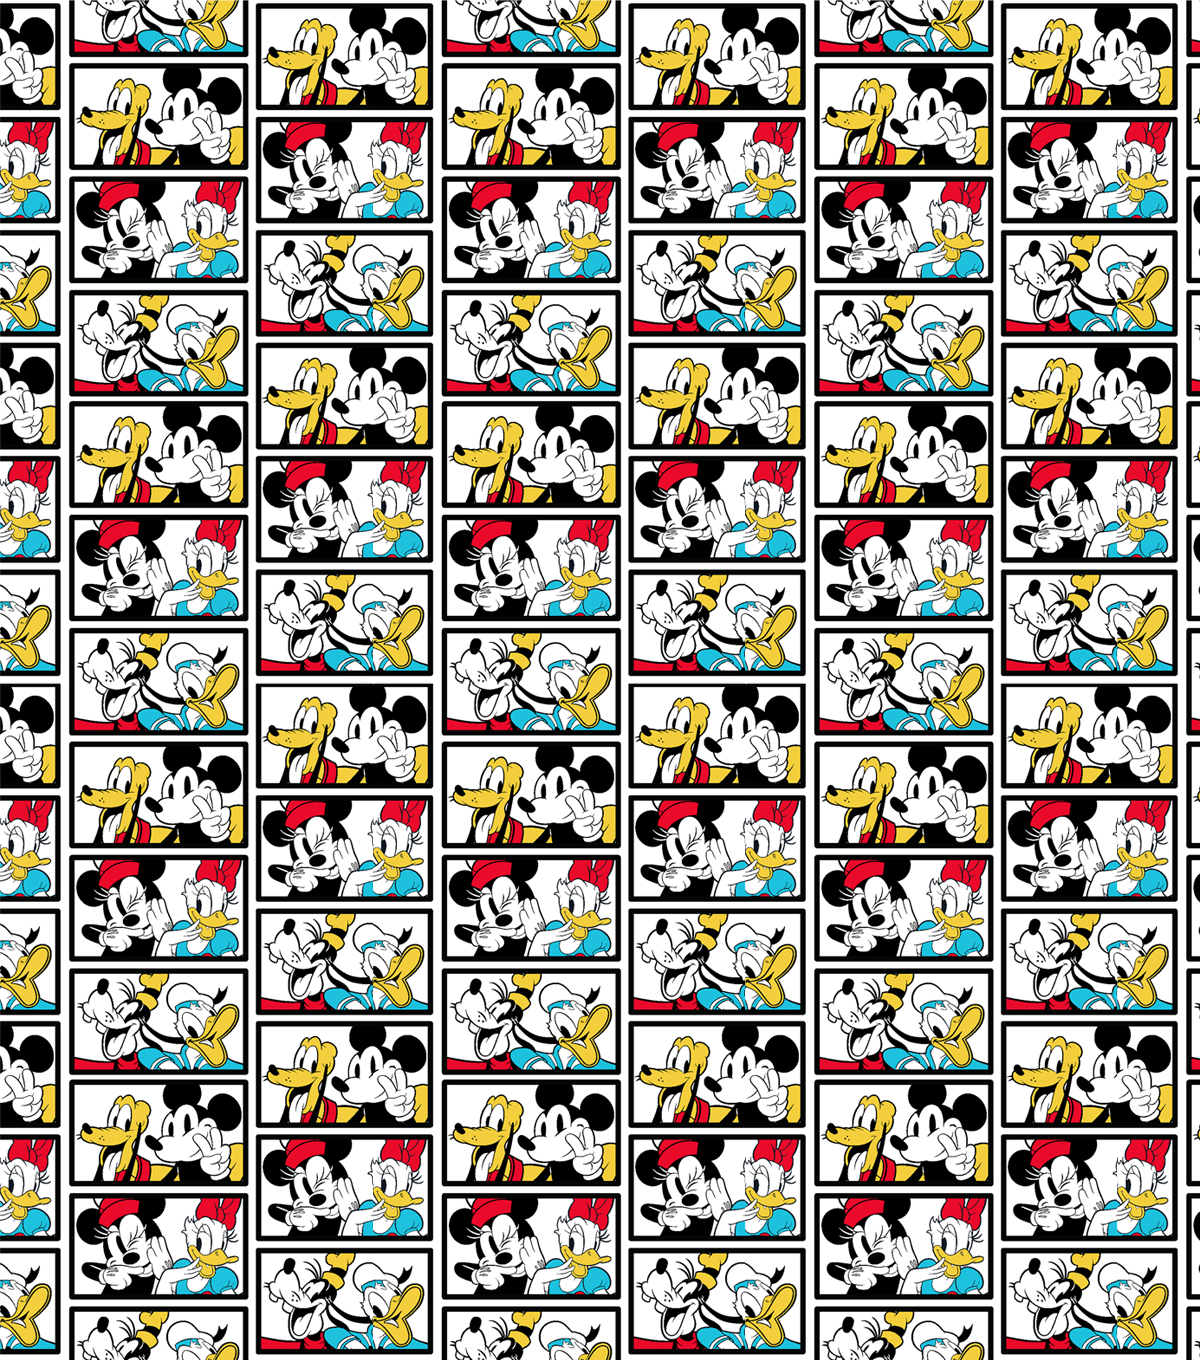 Springs Creative 18" x 21" Cotton Mickey and Friends Tile Precut Sewing & Craft Fabric, Multi-color - image 2 of 3